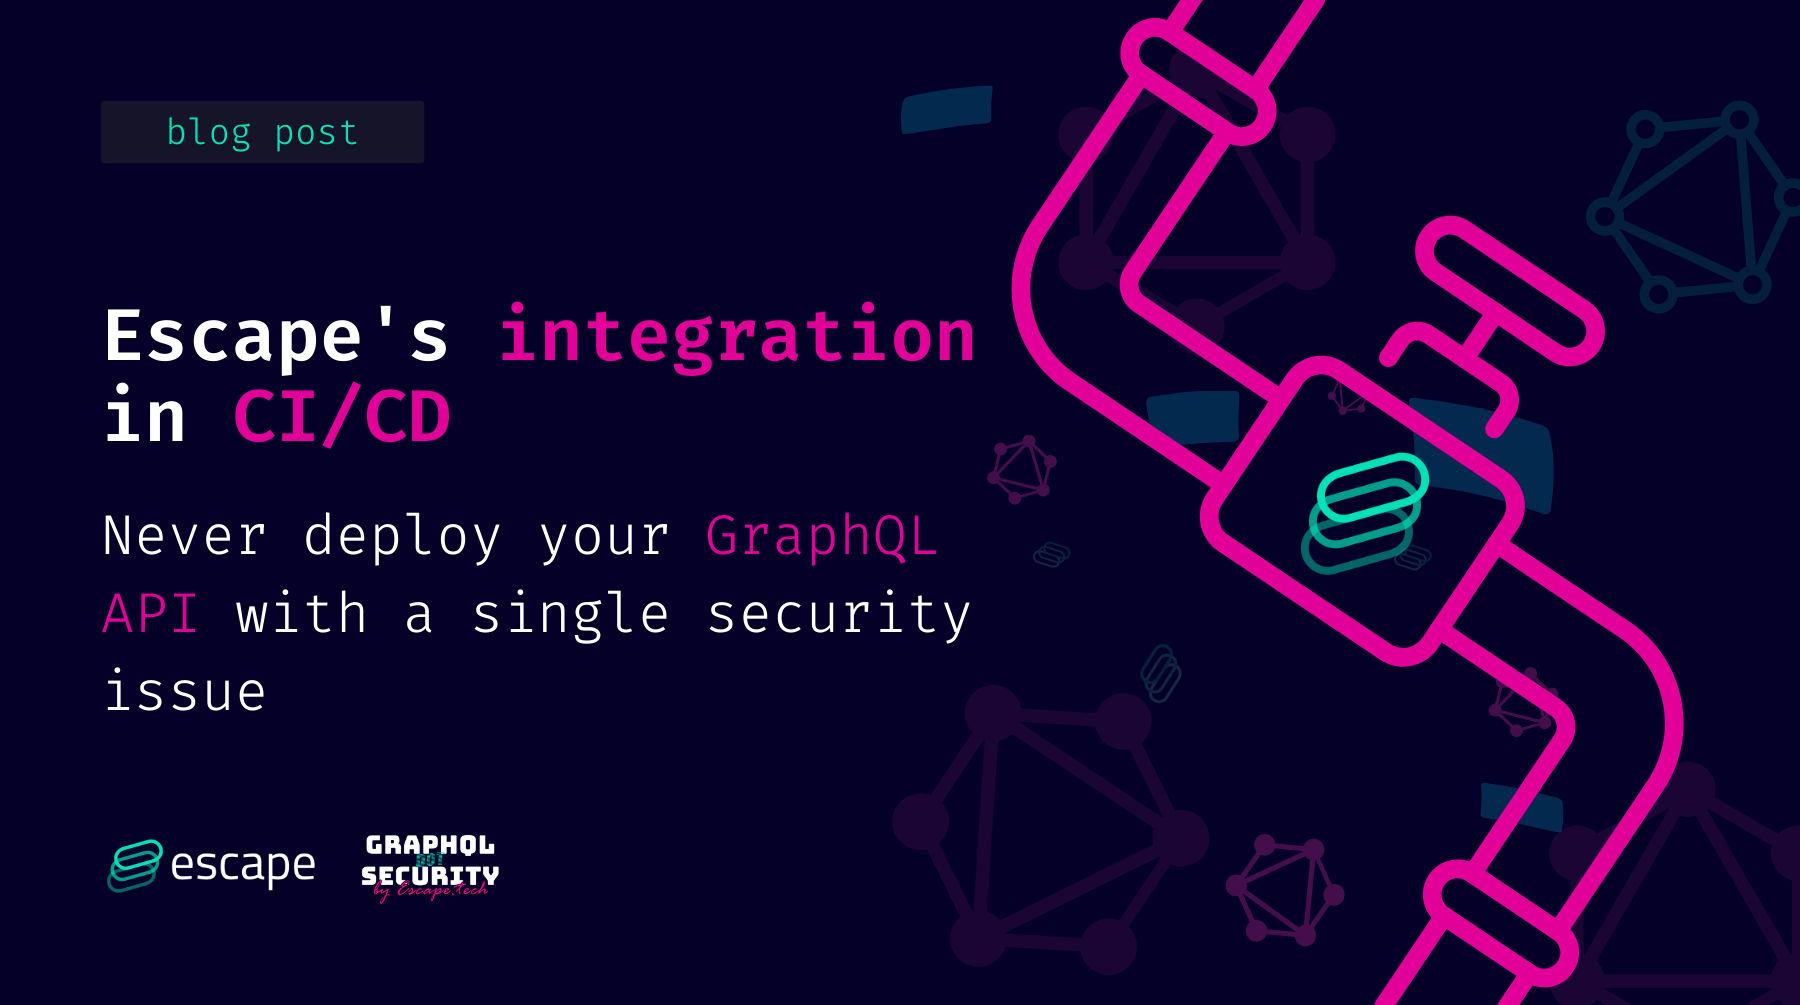 Never deploy your GraphQL API  with a single security issue: Escape’s integration in CI/CD